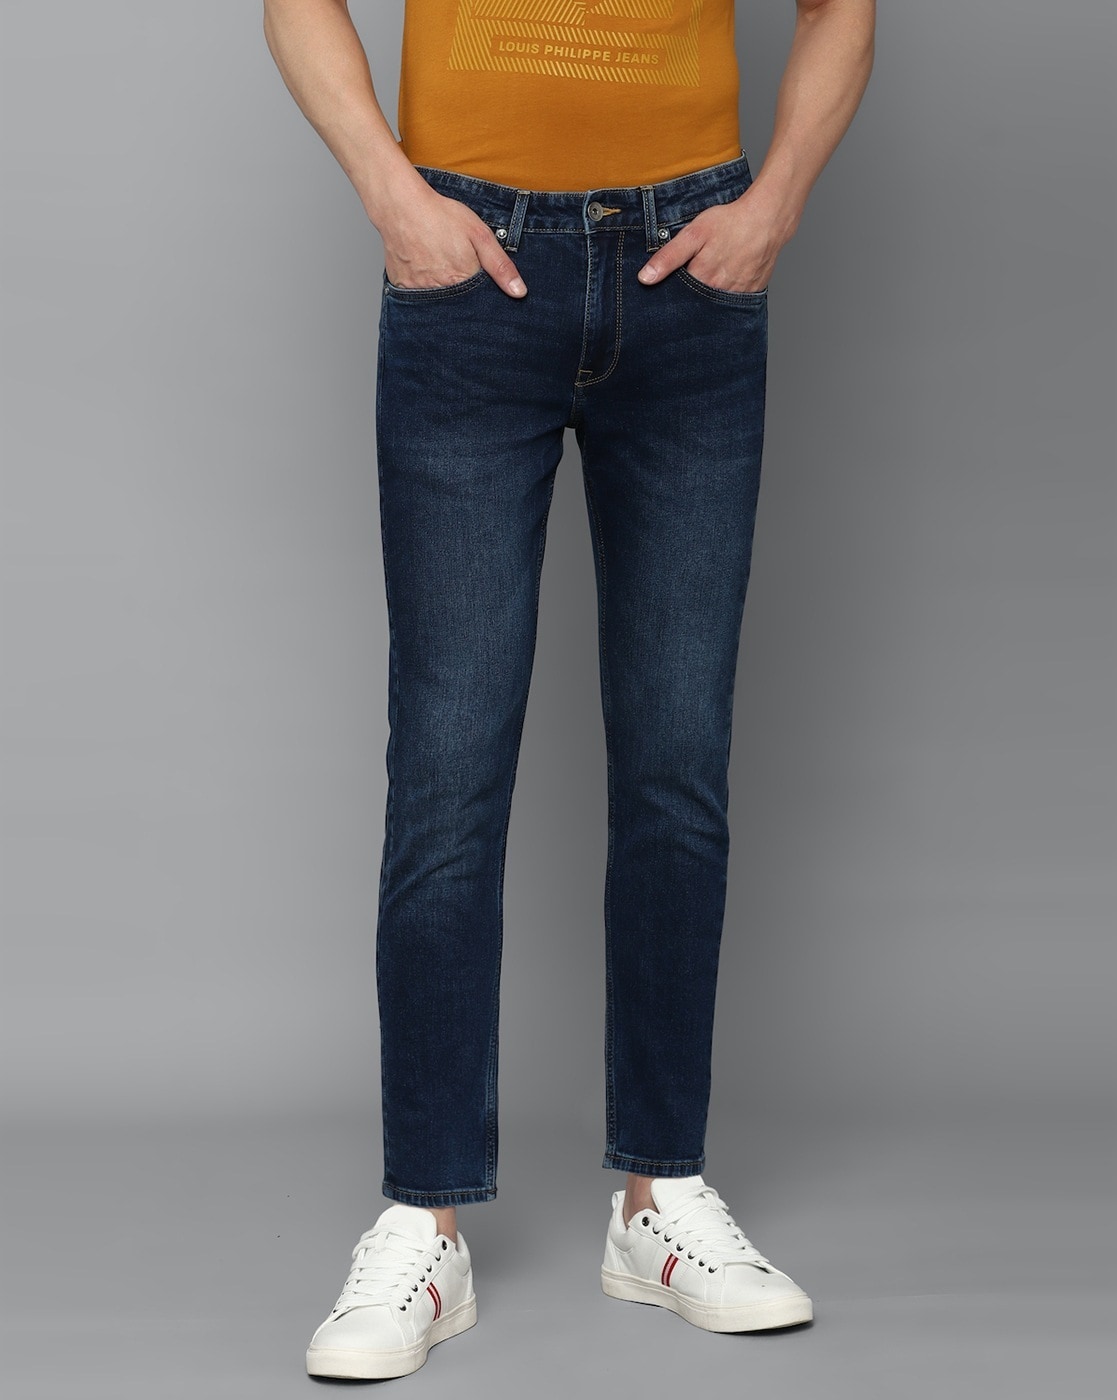 louis philippe jeans